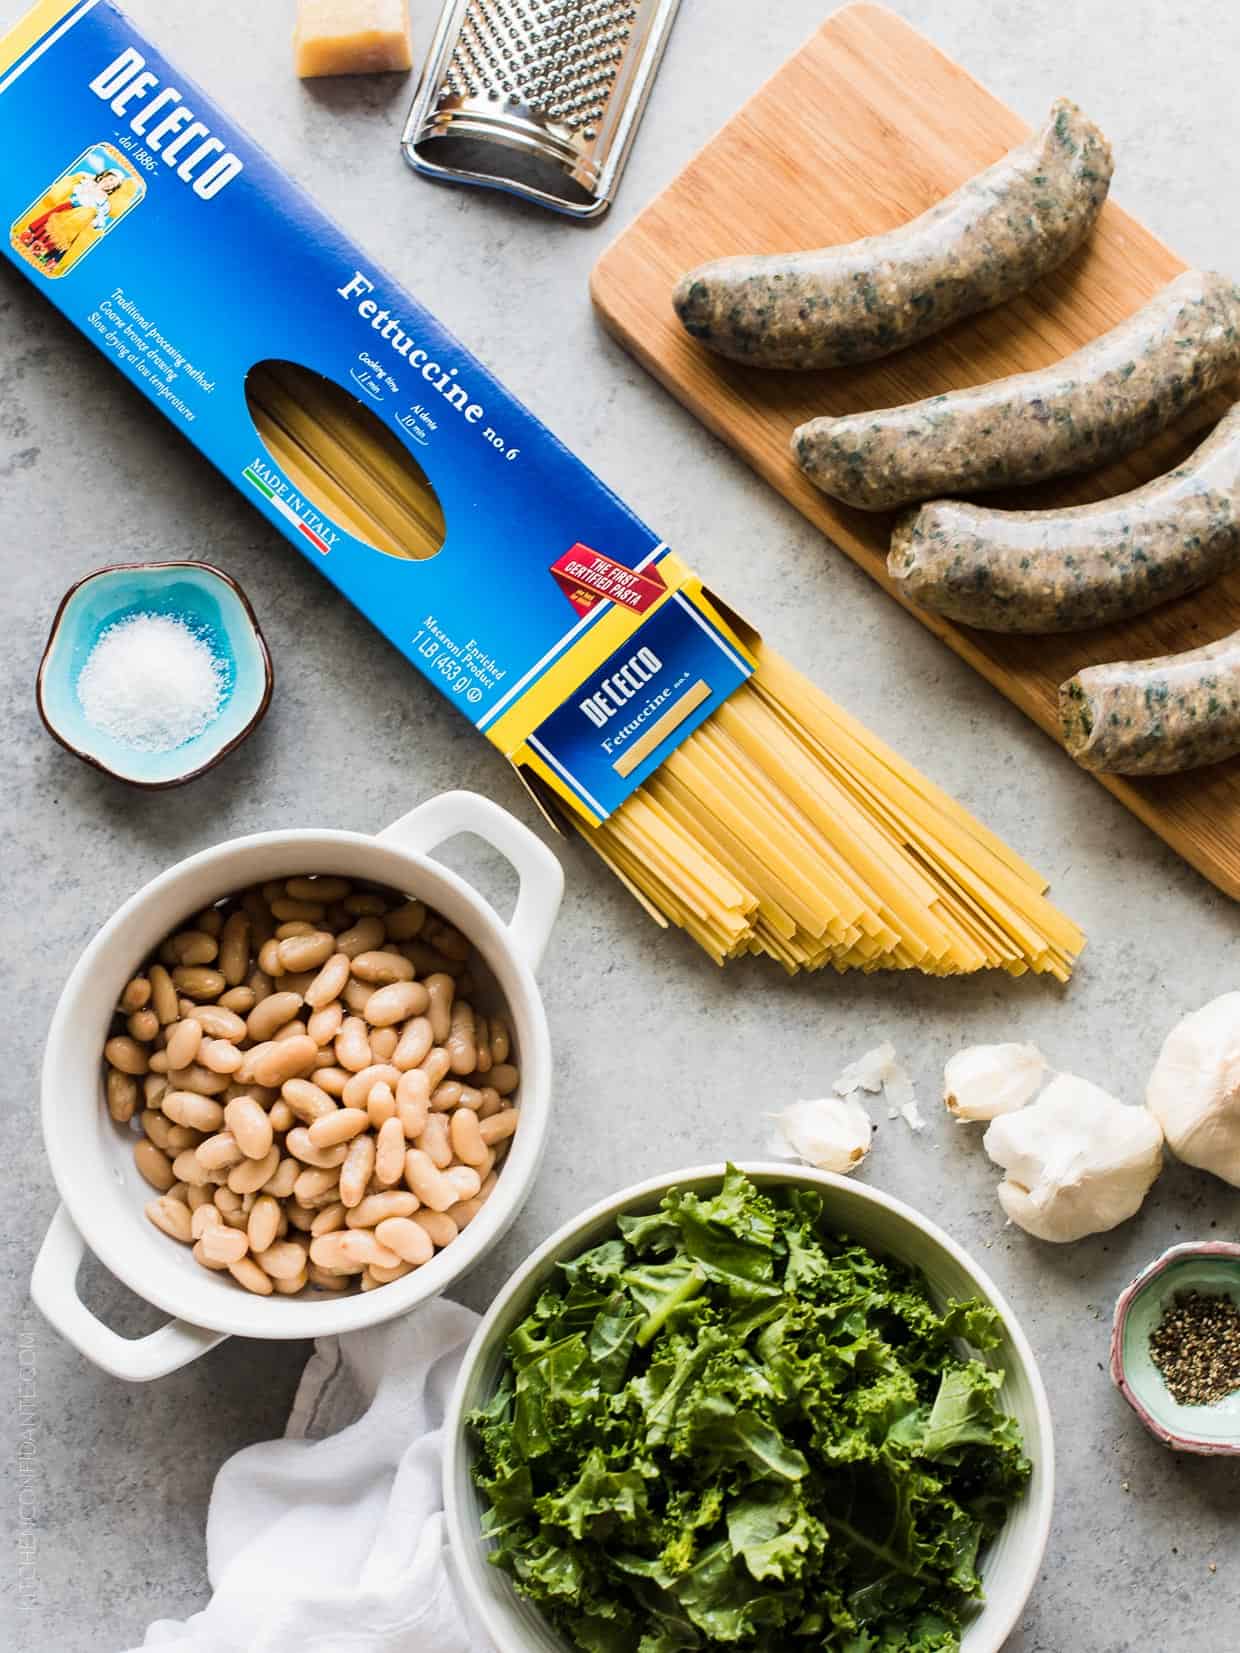 Ingredients assembled to prepare Fettuccine with Chicken Sausage, Kale and Cannellini Beans.